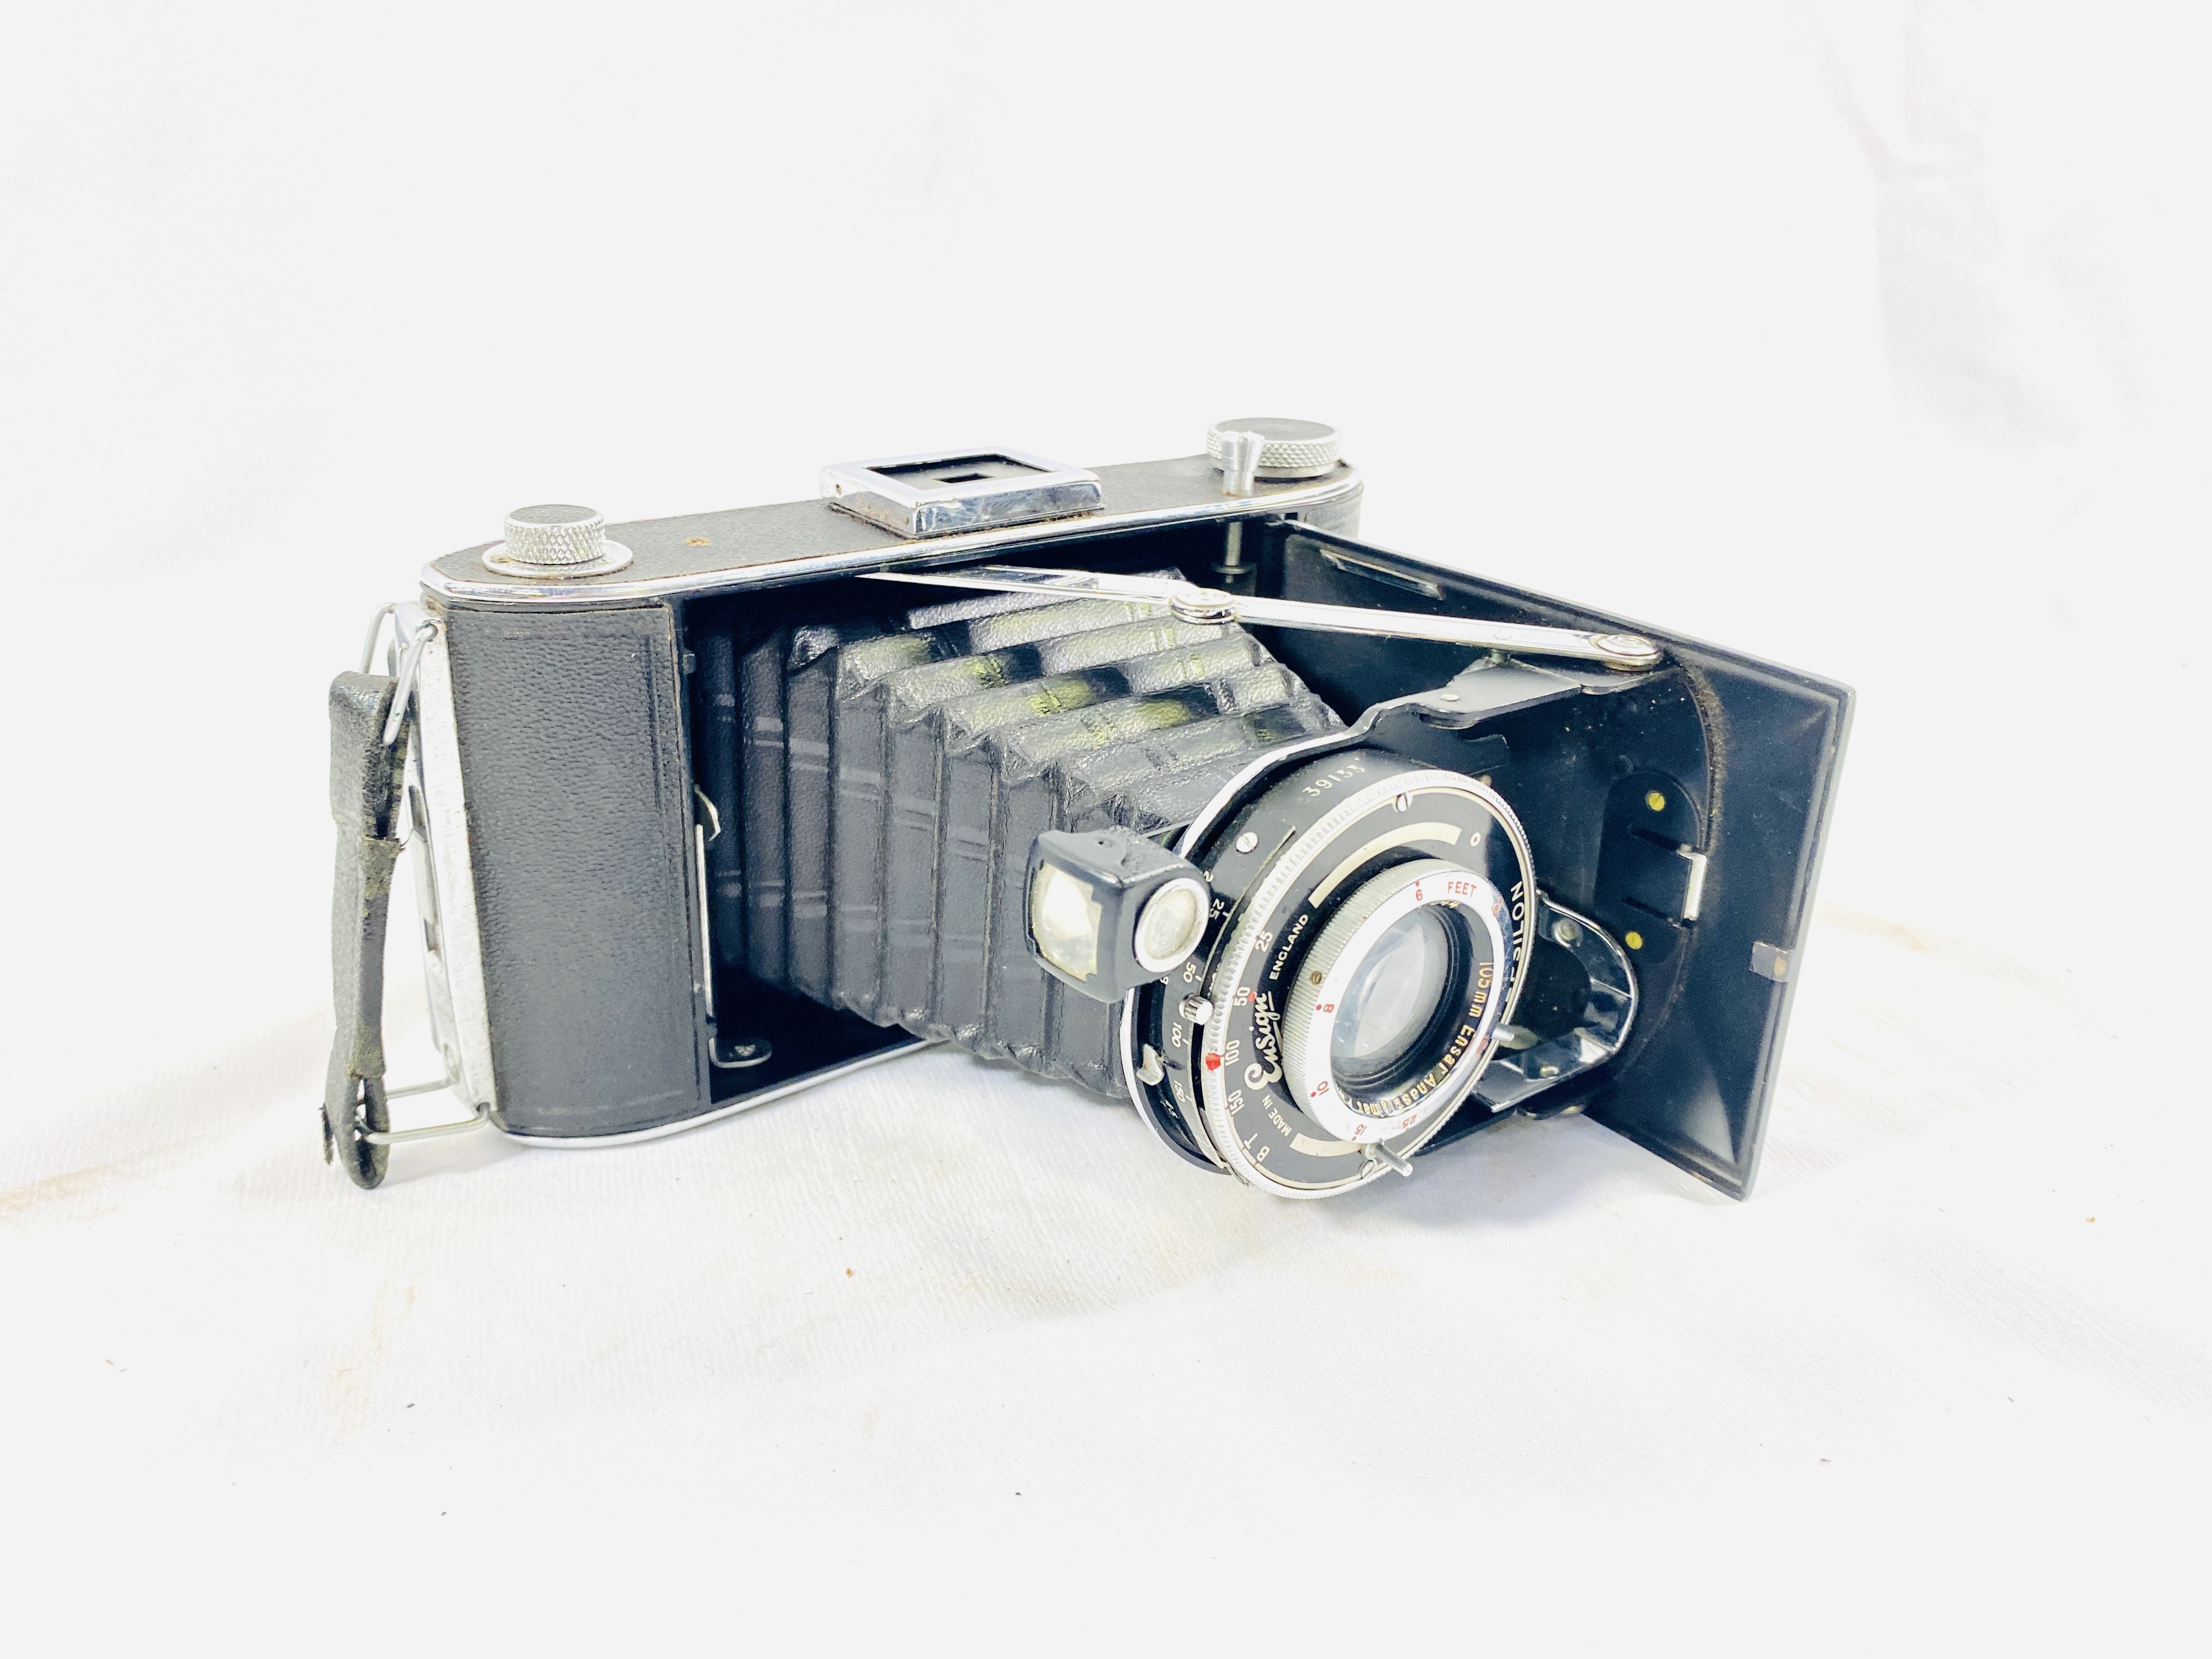 An 8mm camera together with two other cameras